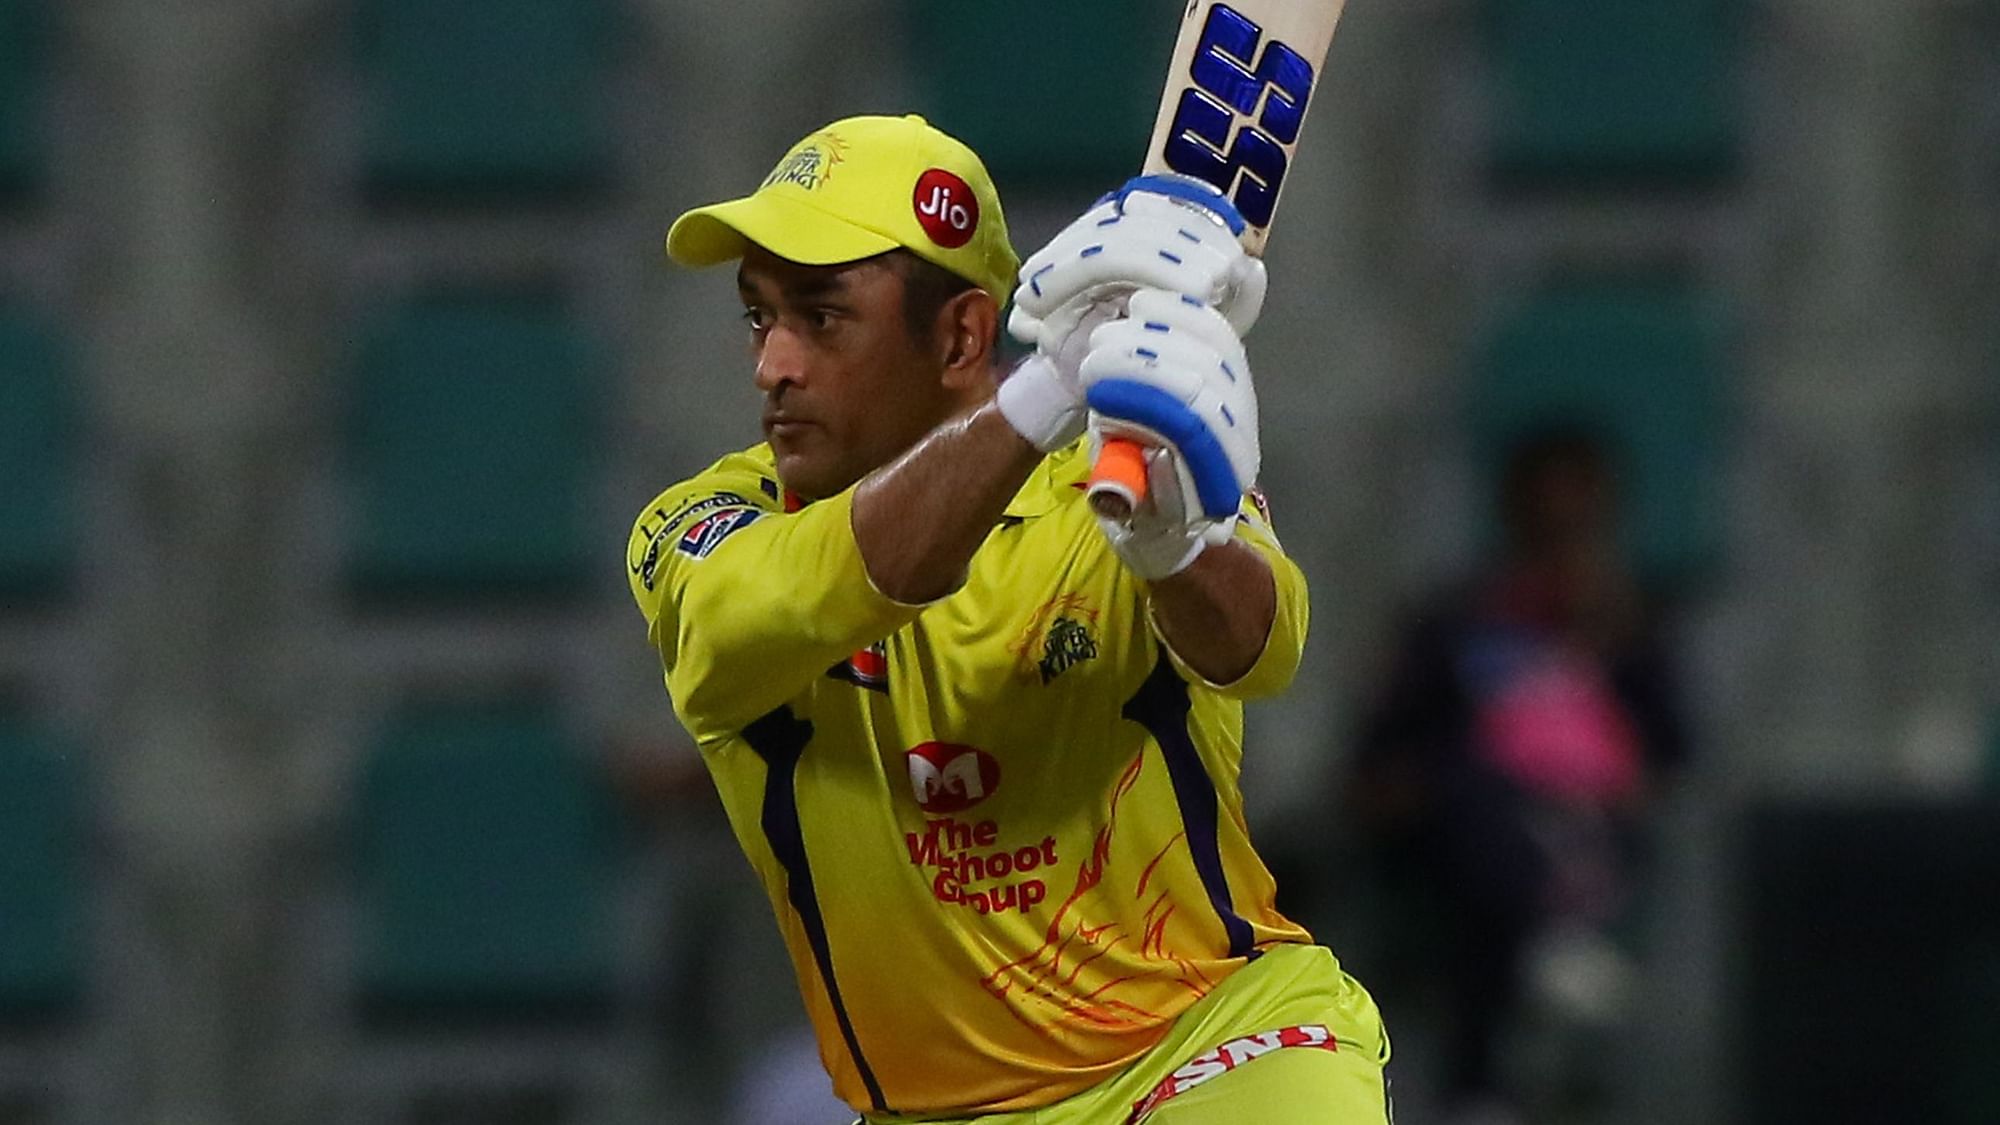 CSK managed to post 125/5 in their 20 overs vs RR.